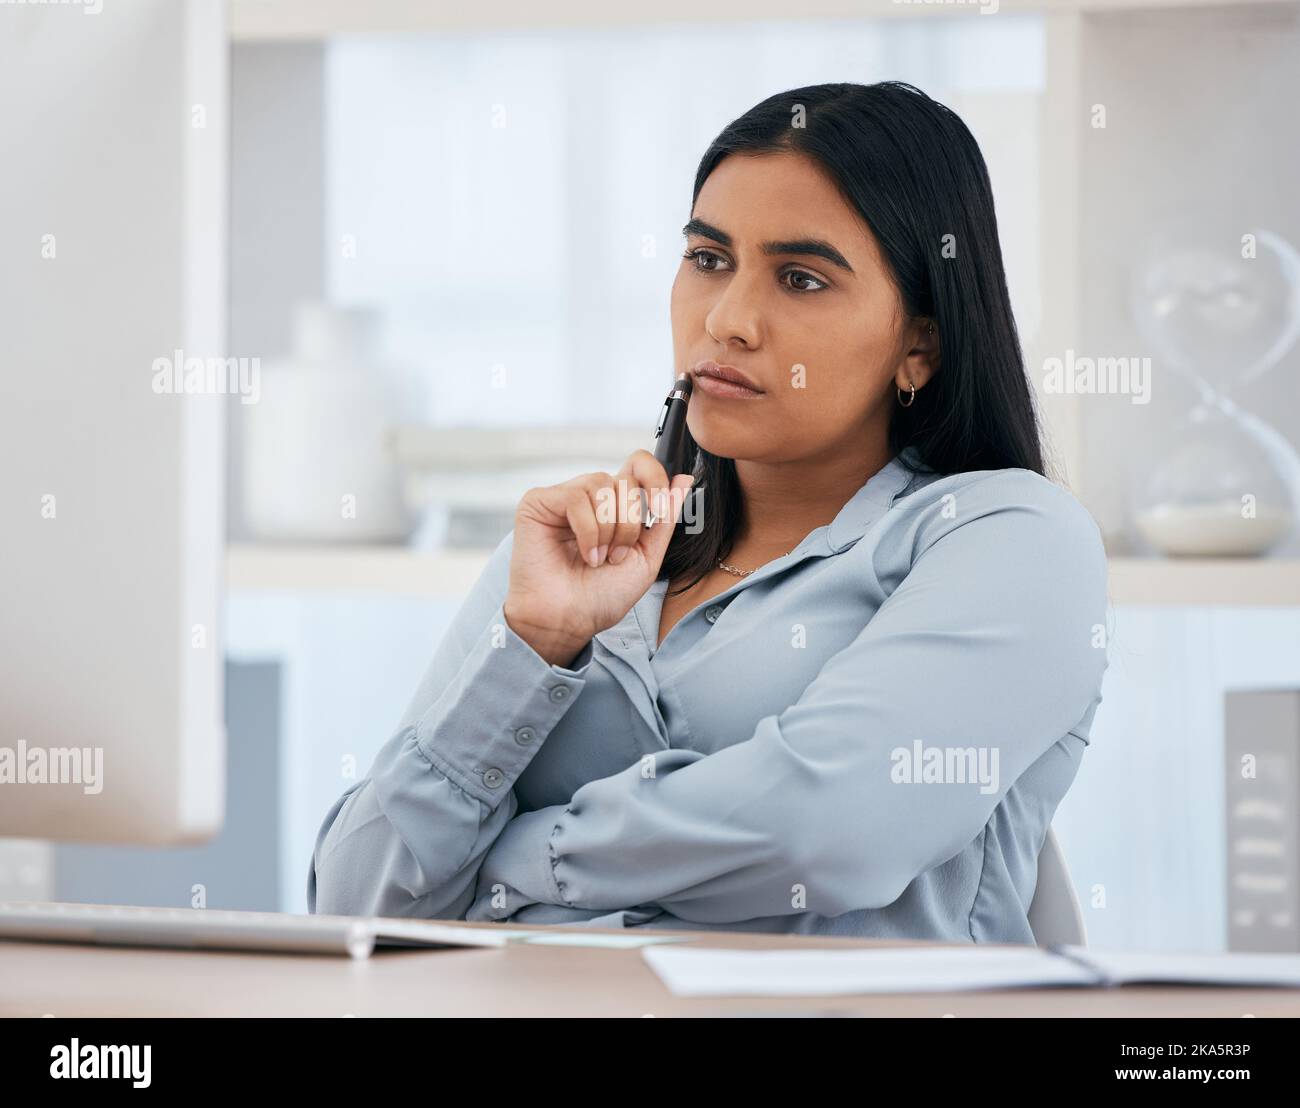 Computer, thinking and idea with a business woman at work alone at a desk in an office alone. Internet, email and planning with a female employee Stock Photo